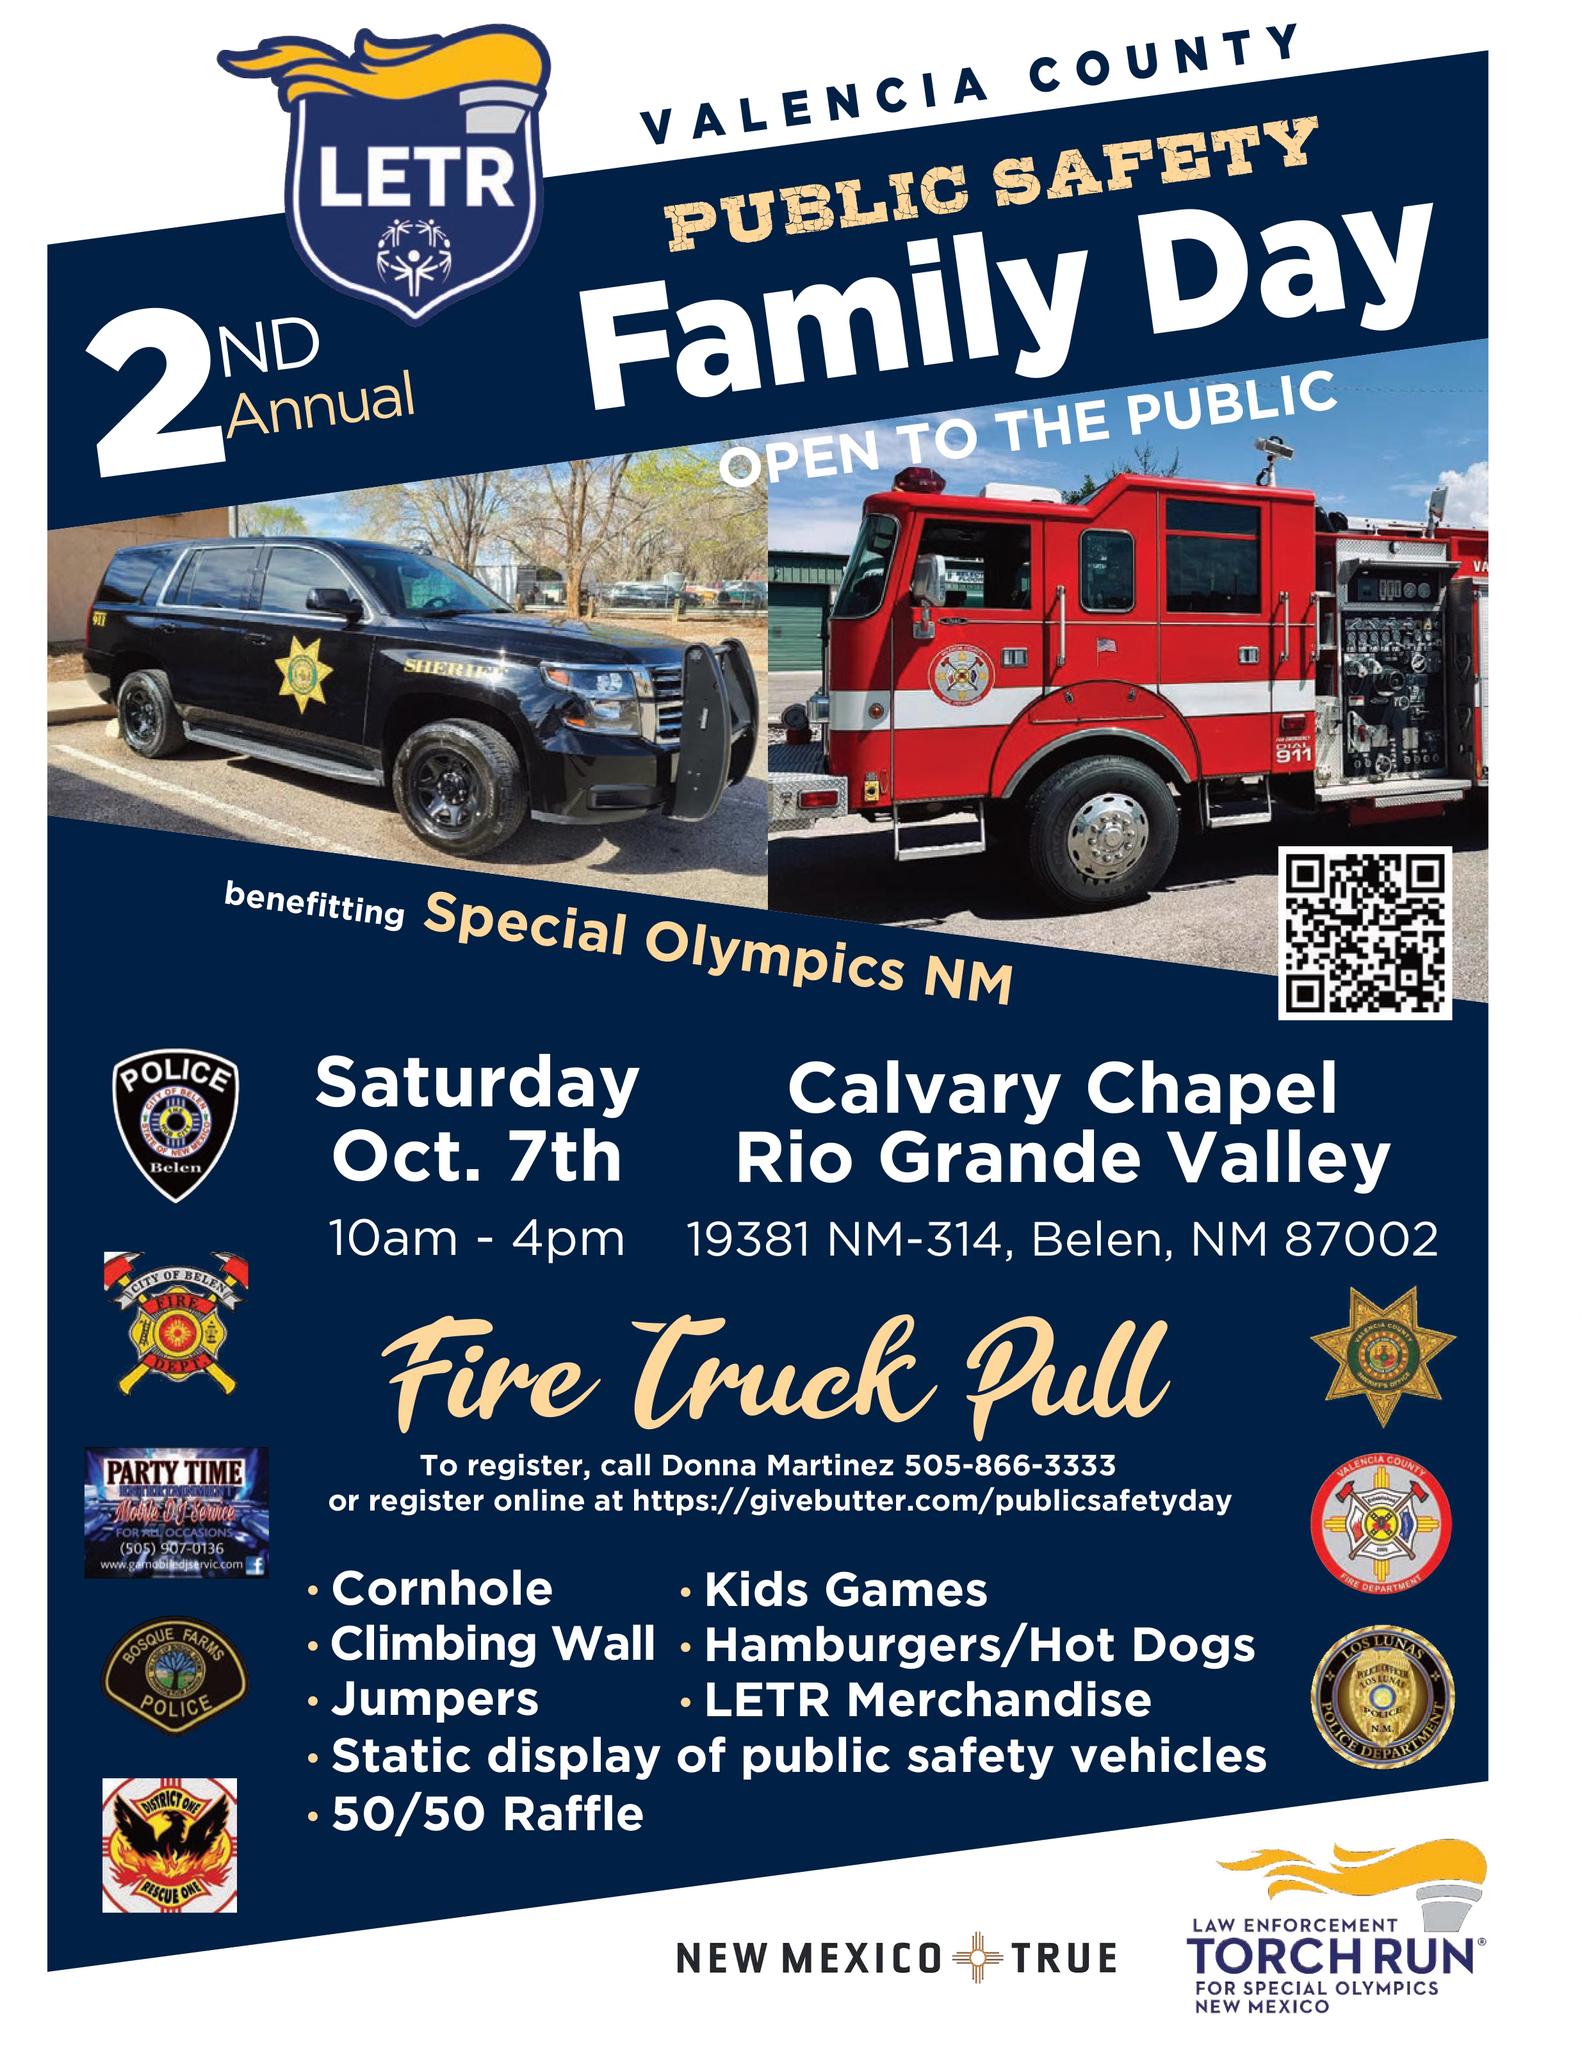 Featured image for “Valencia County Public Safety Family Day”